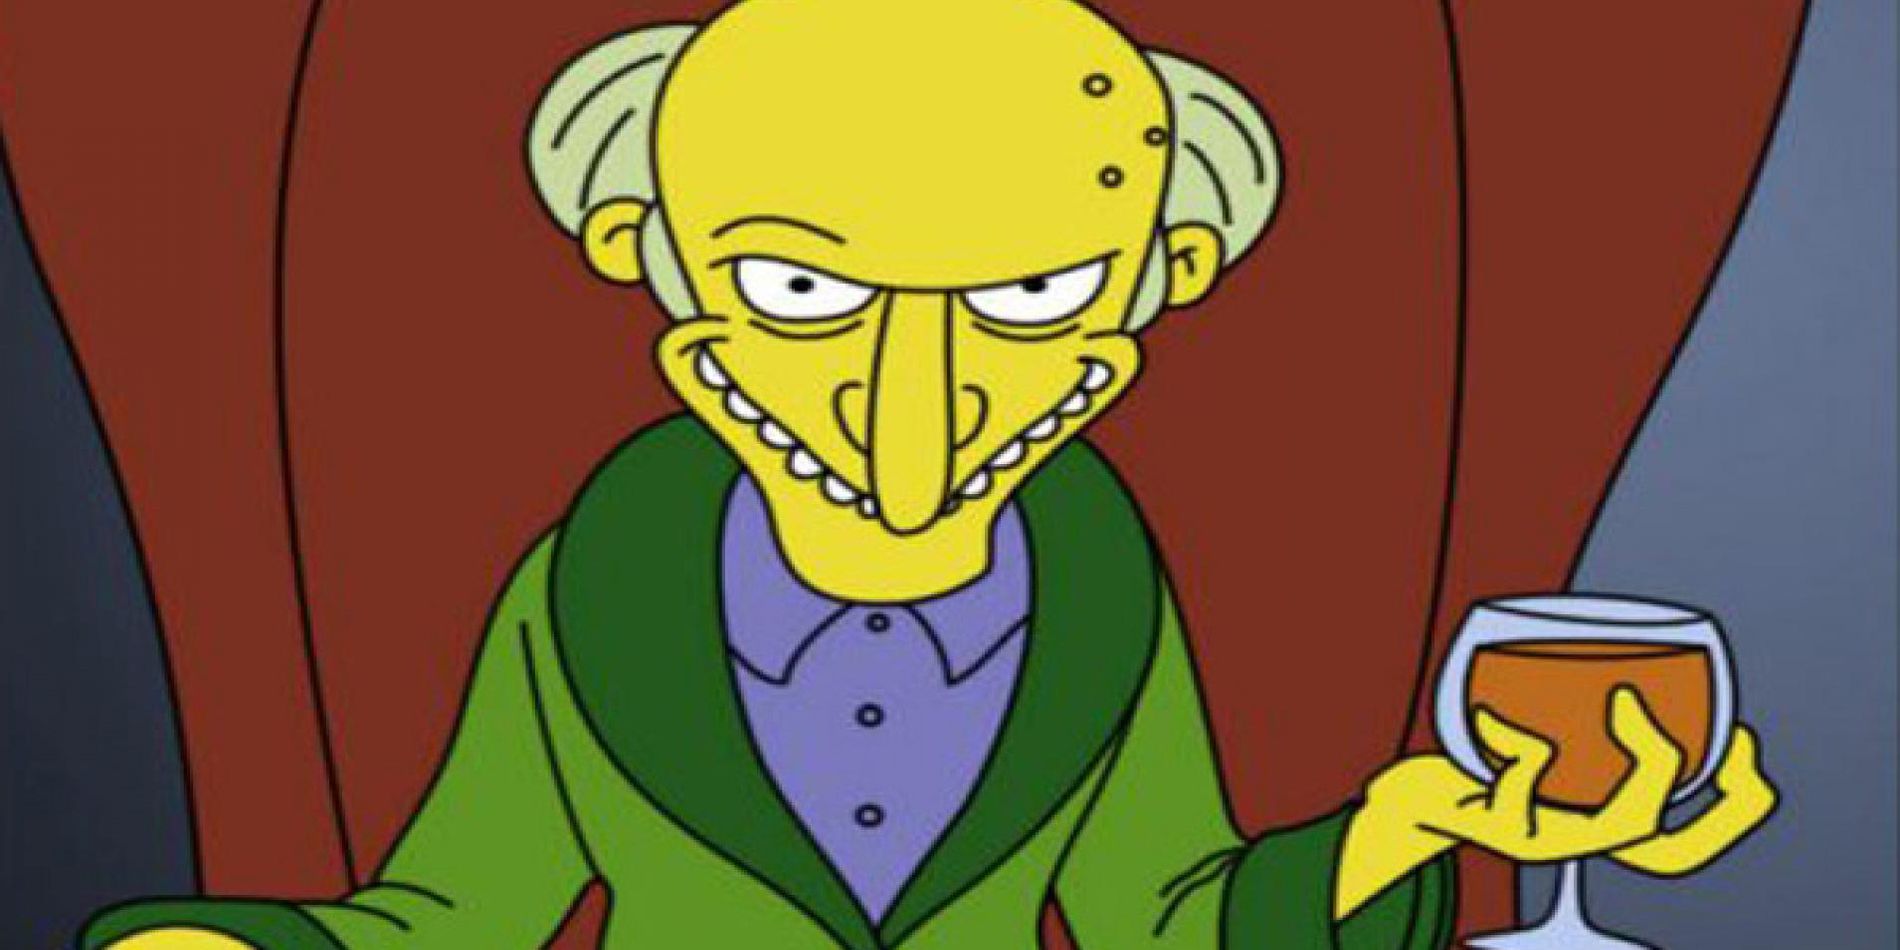 Mr. Burns from The Simpsons